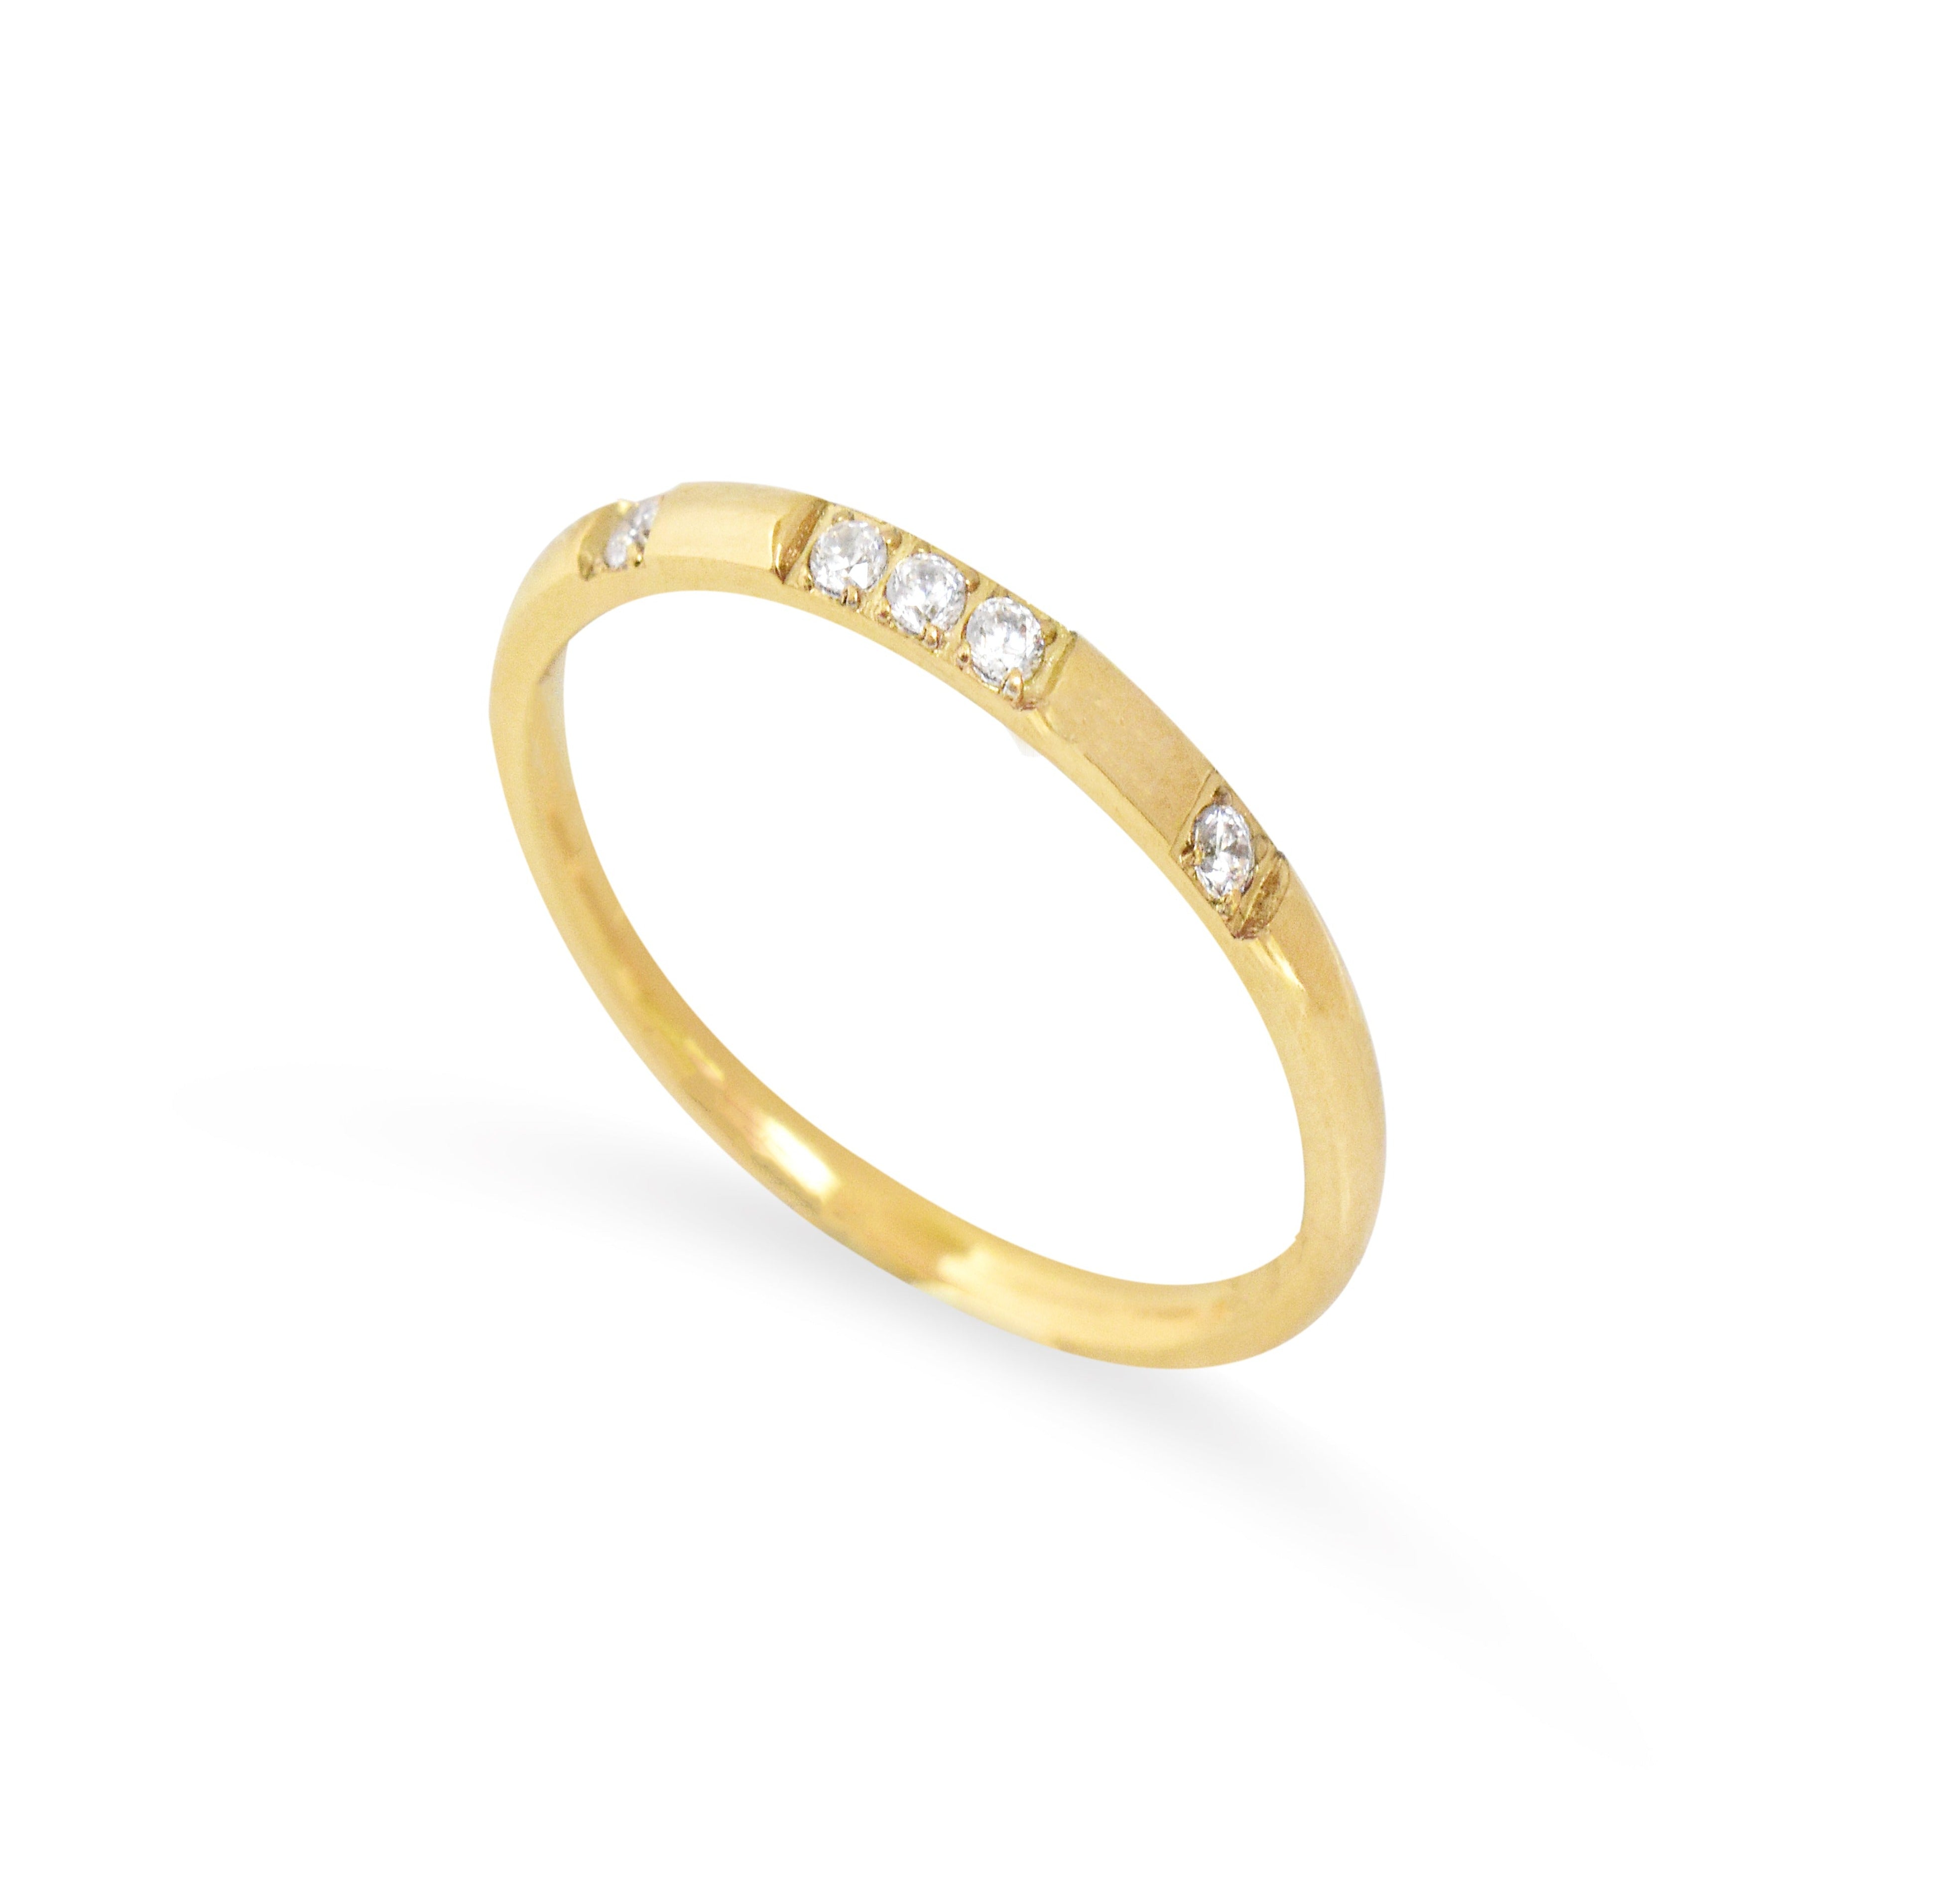 Veda thin gold pave ring band. Gold waterproof jewelry